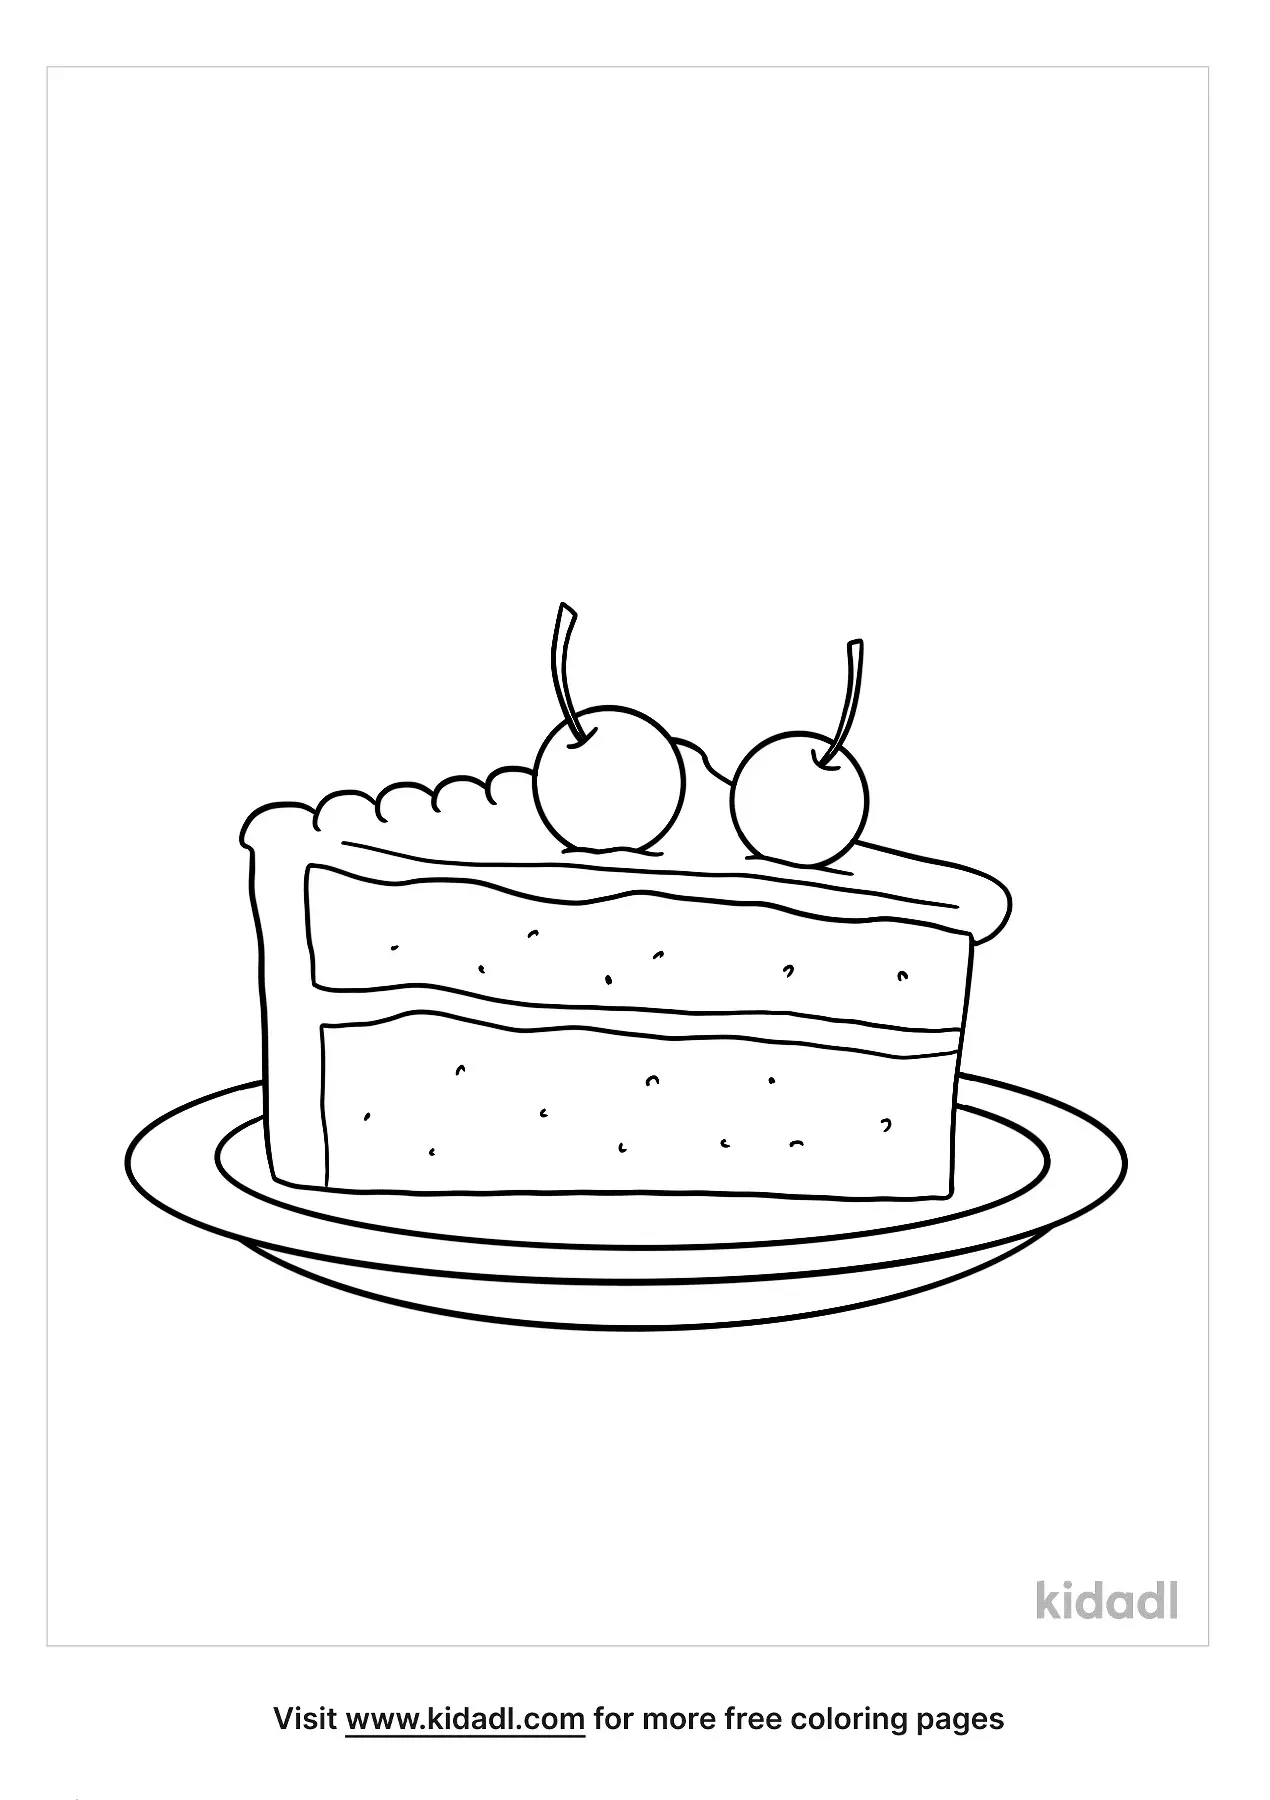 free-printable-birthday-cake-coloring-pages-for-kids-cool2bkids